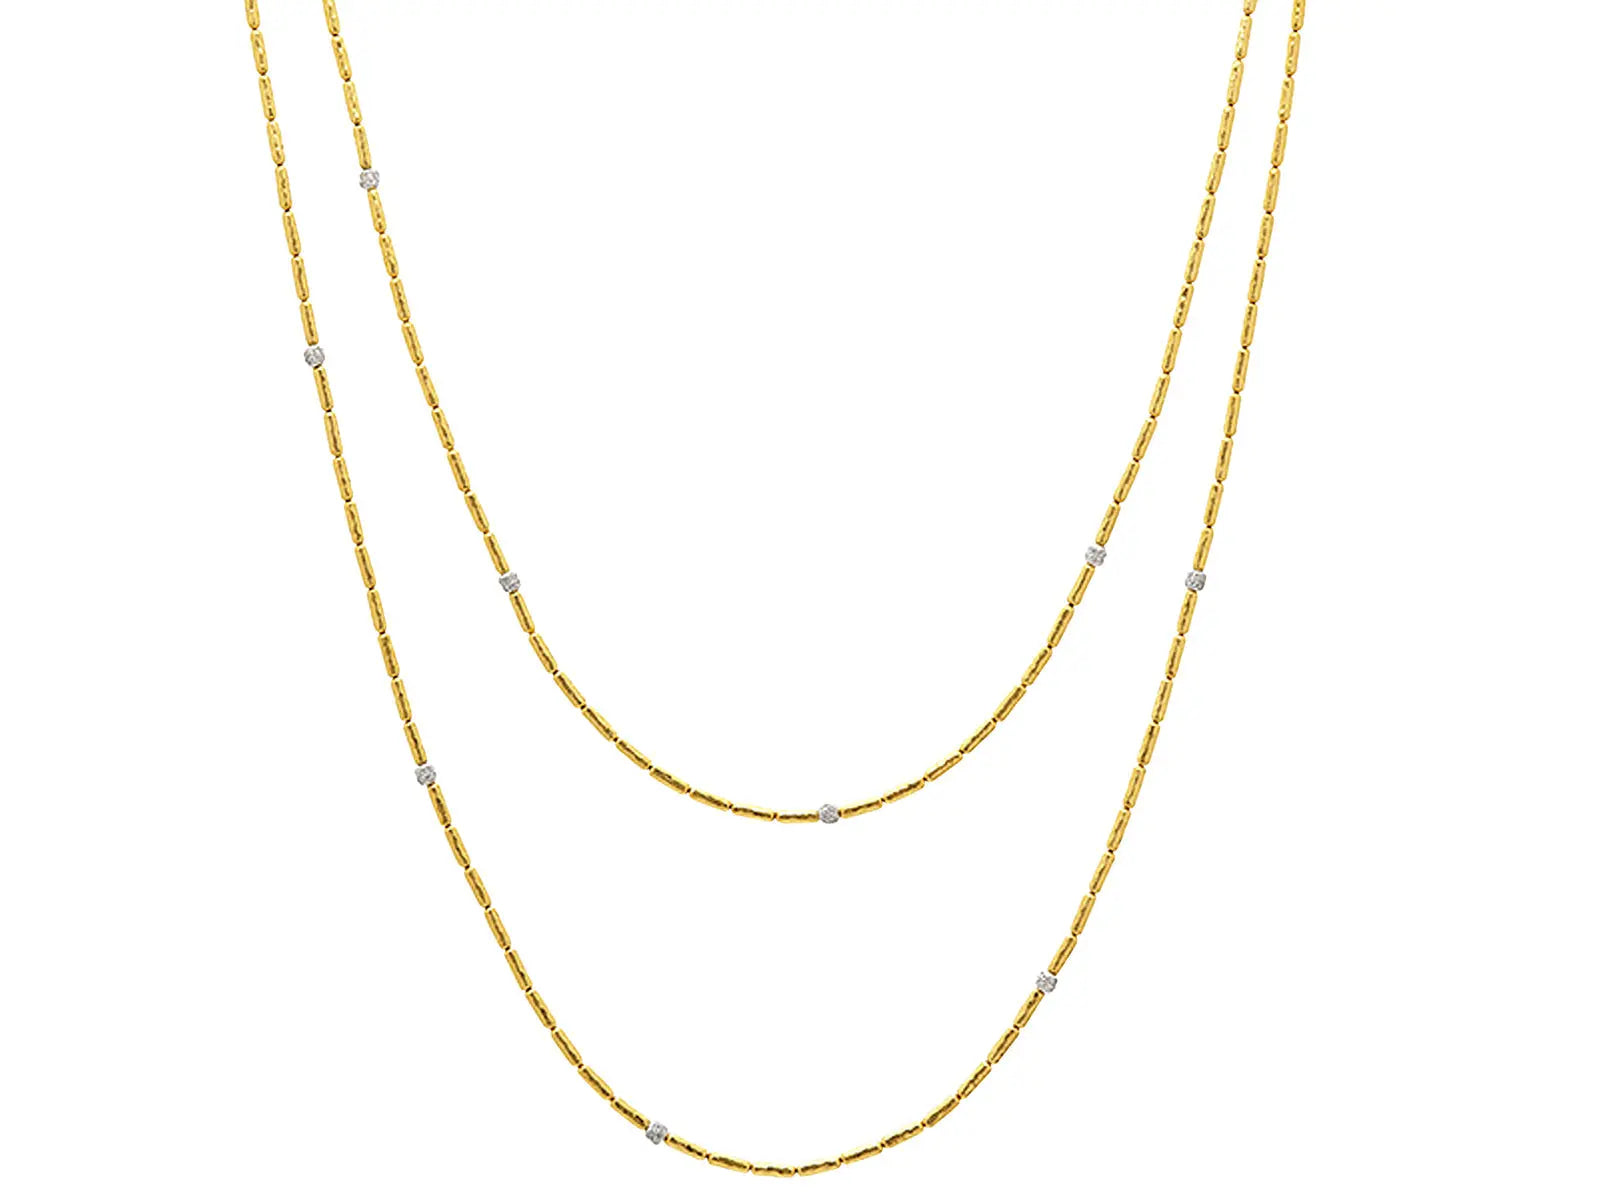 Gurhan's Single Strand Necklace in 24k yellow gold and pave diamonds. It has 10 pave diamond stations measuring 3.5mm wide with hammered beads. The necklace measures 36-38 inches.